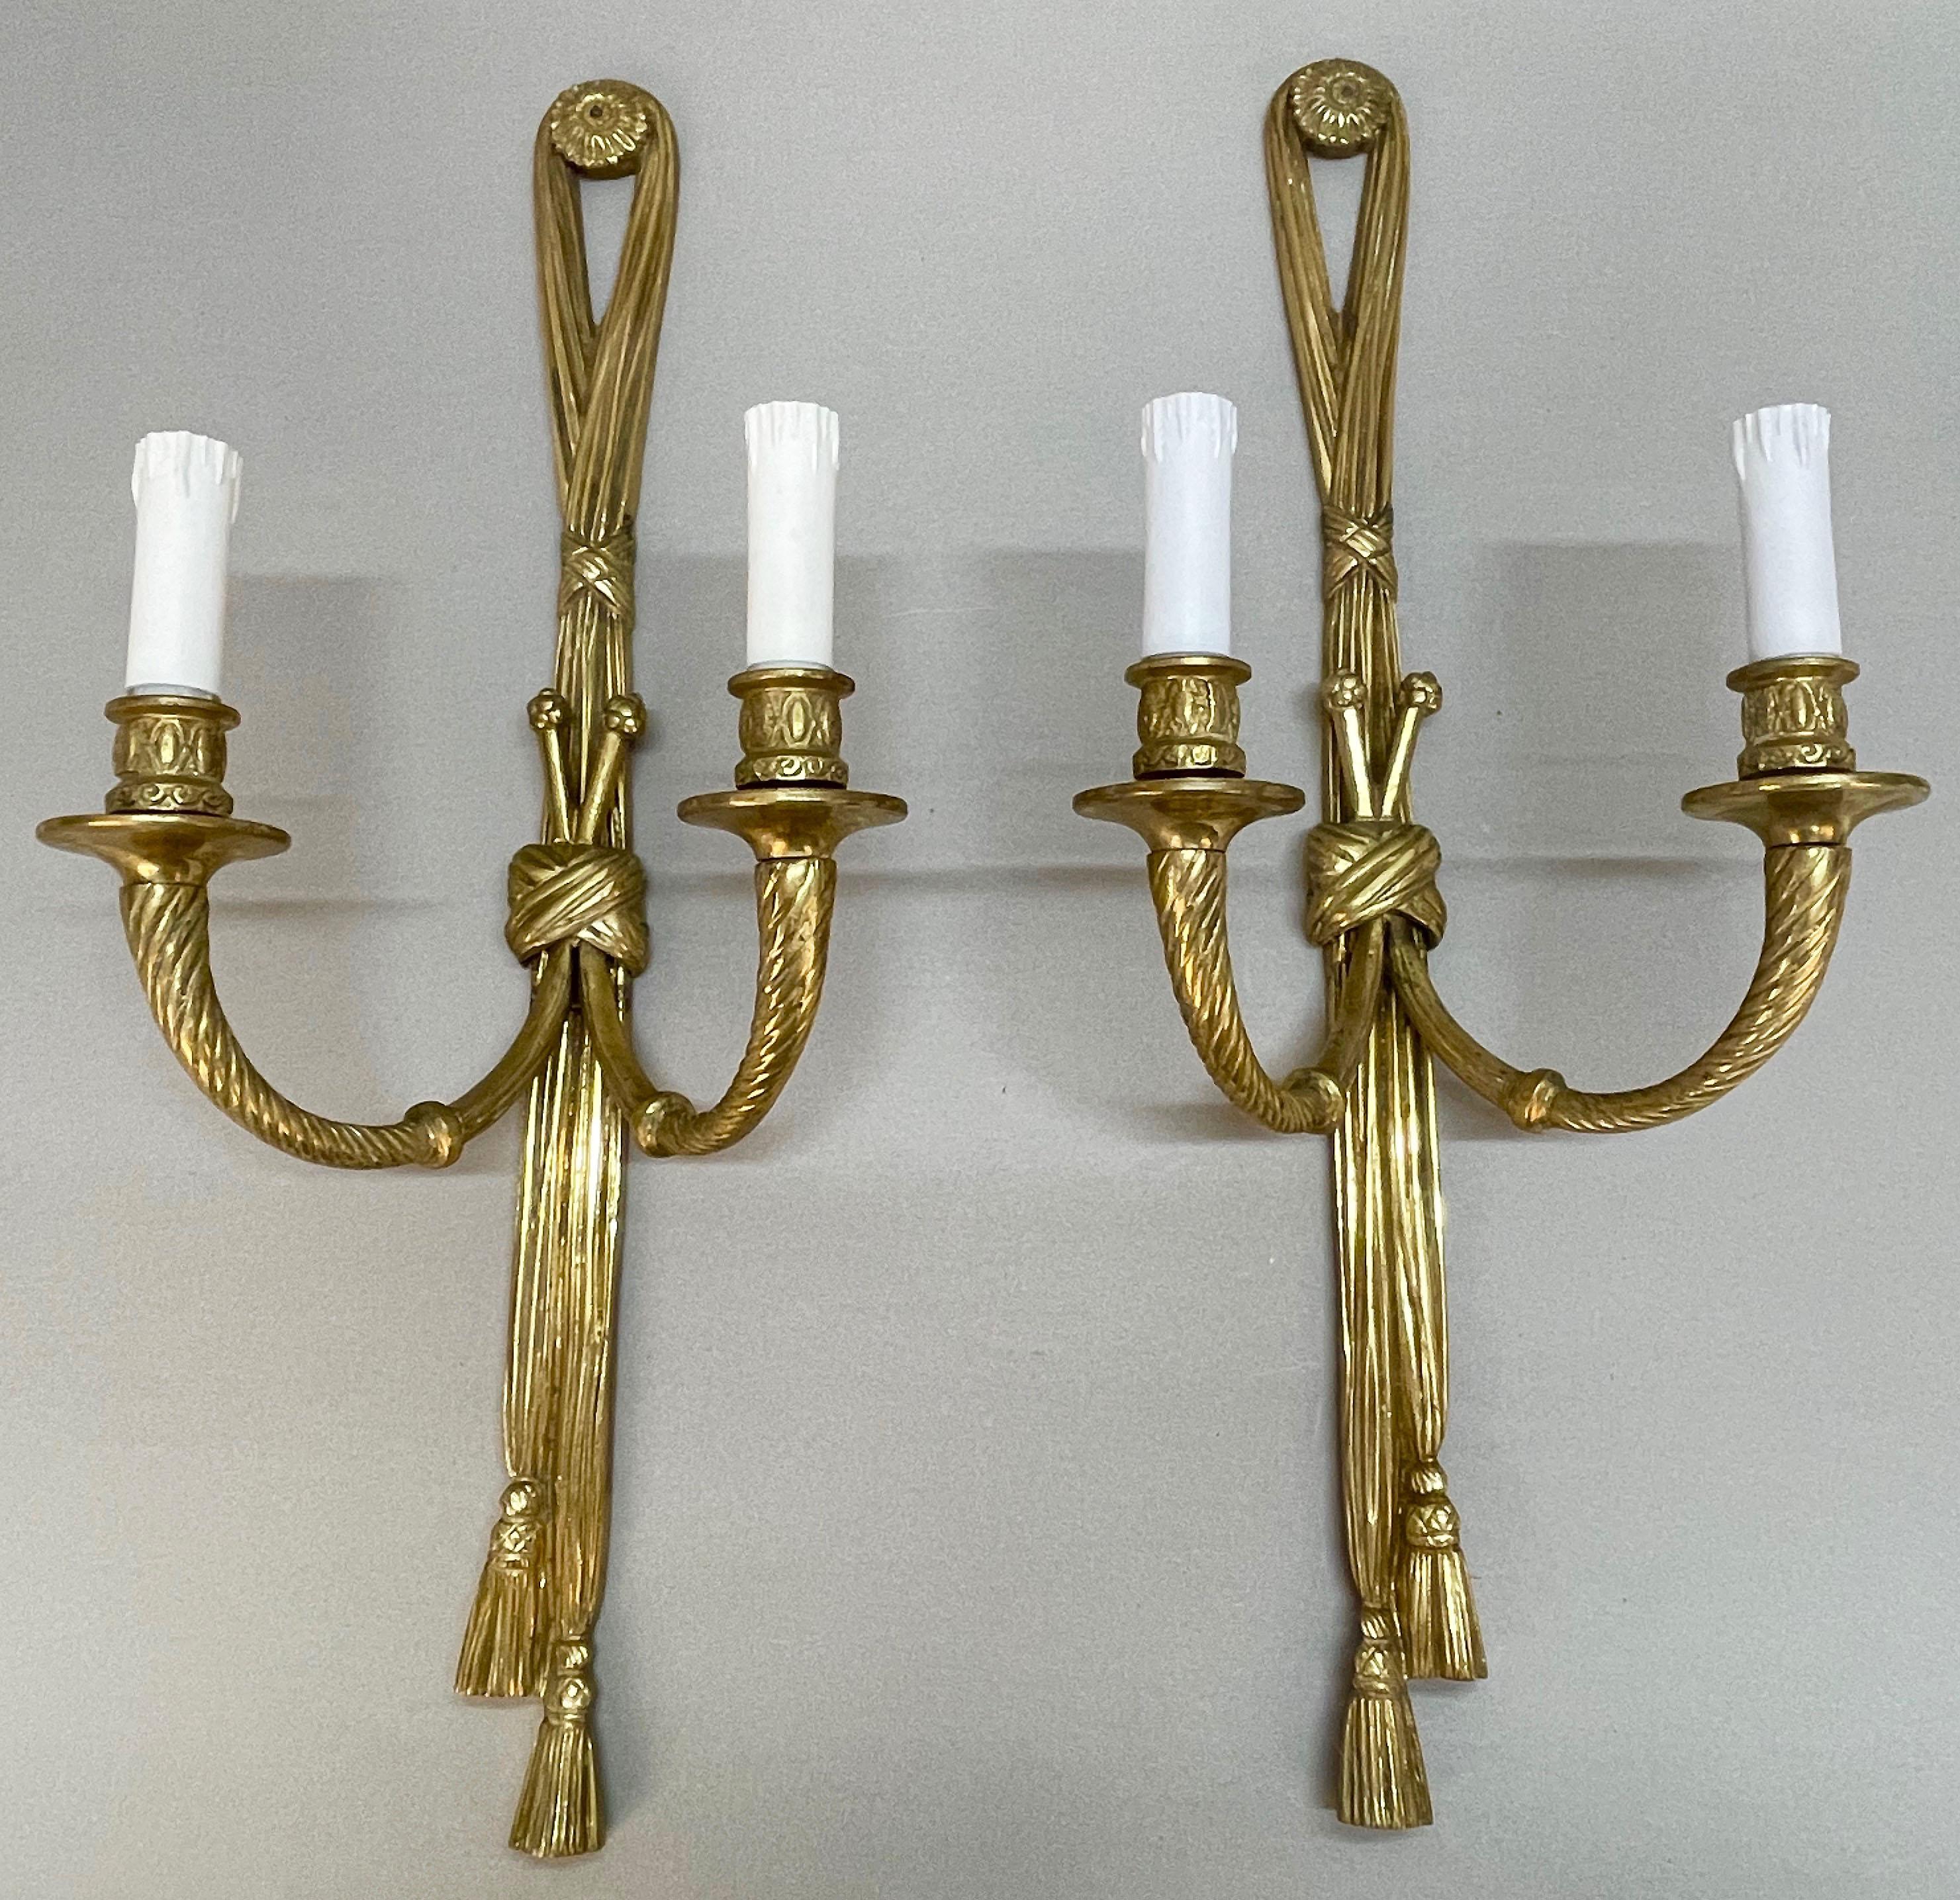 Pair of 19th Century Louis XVI Style Knot & Tassel Appliqué Wall Candle Sconces For Sale 3